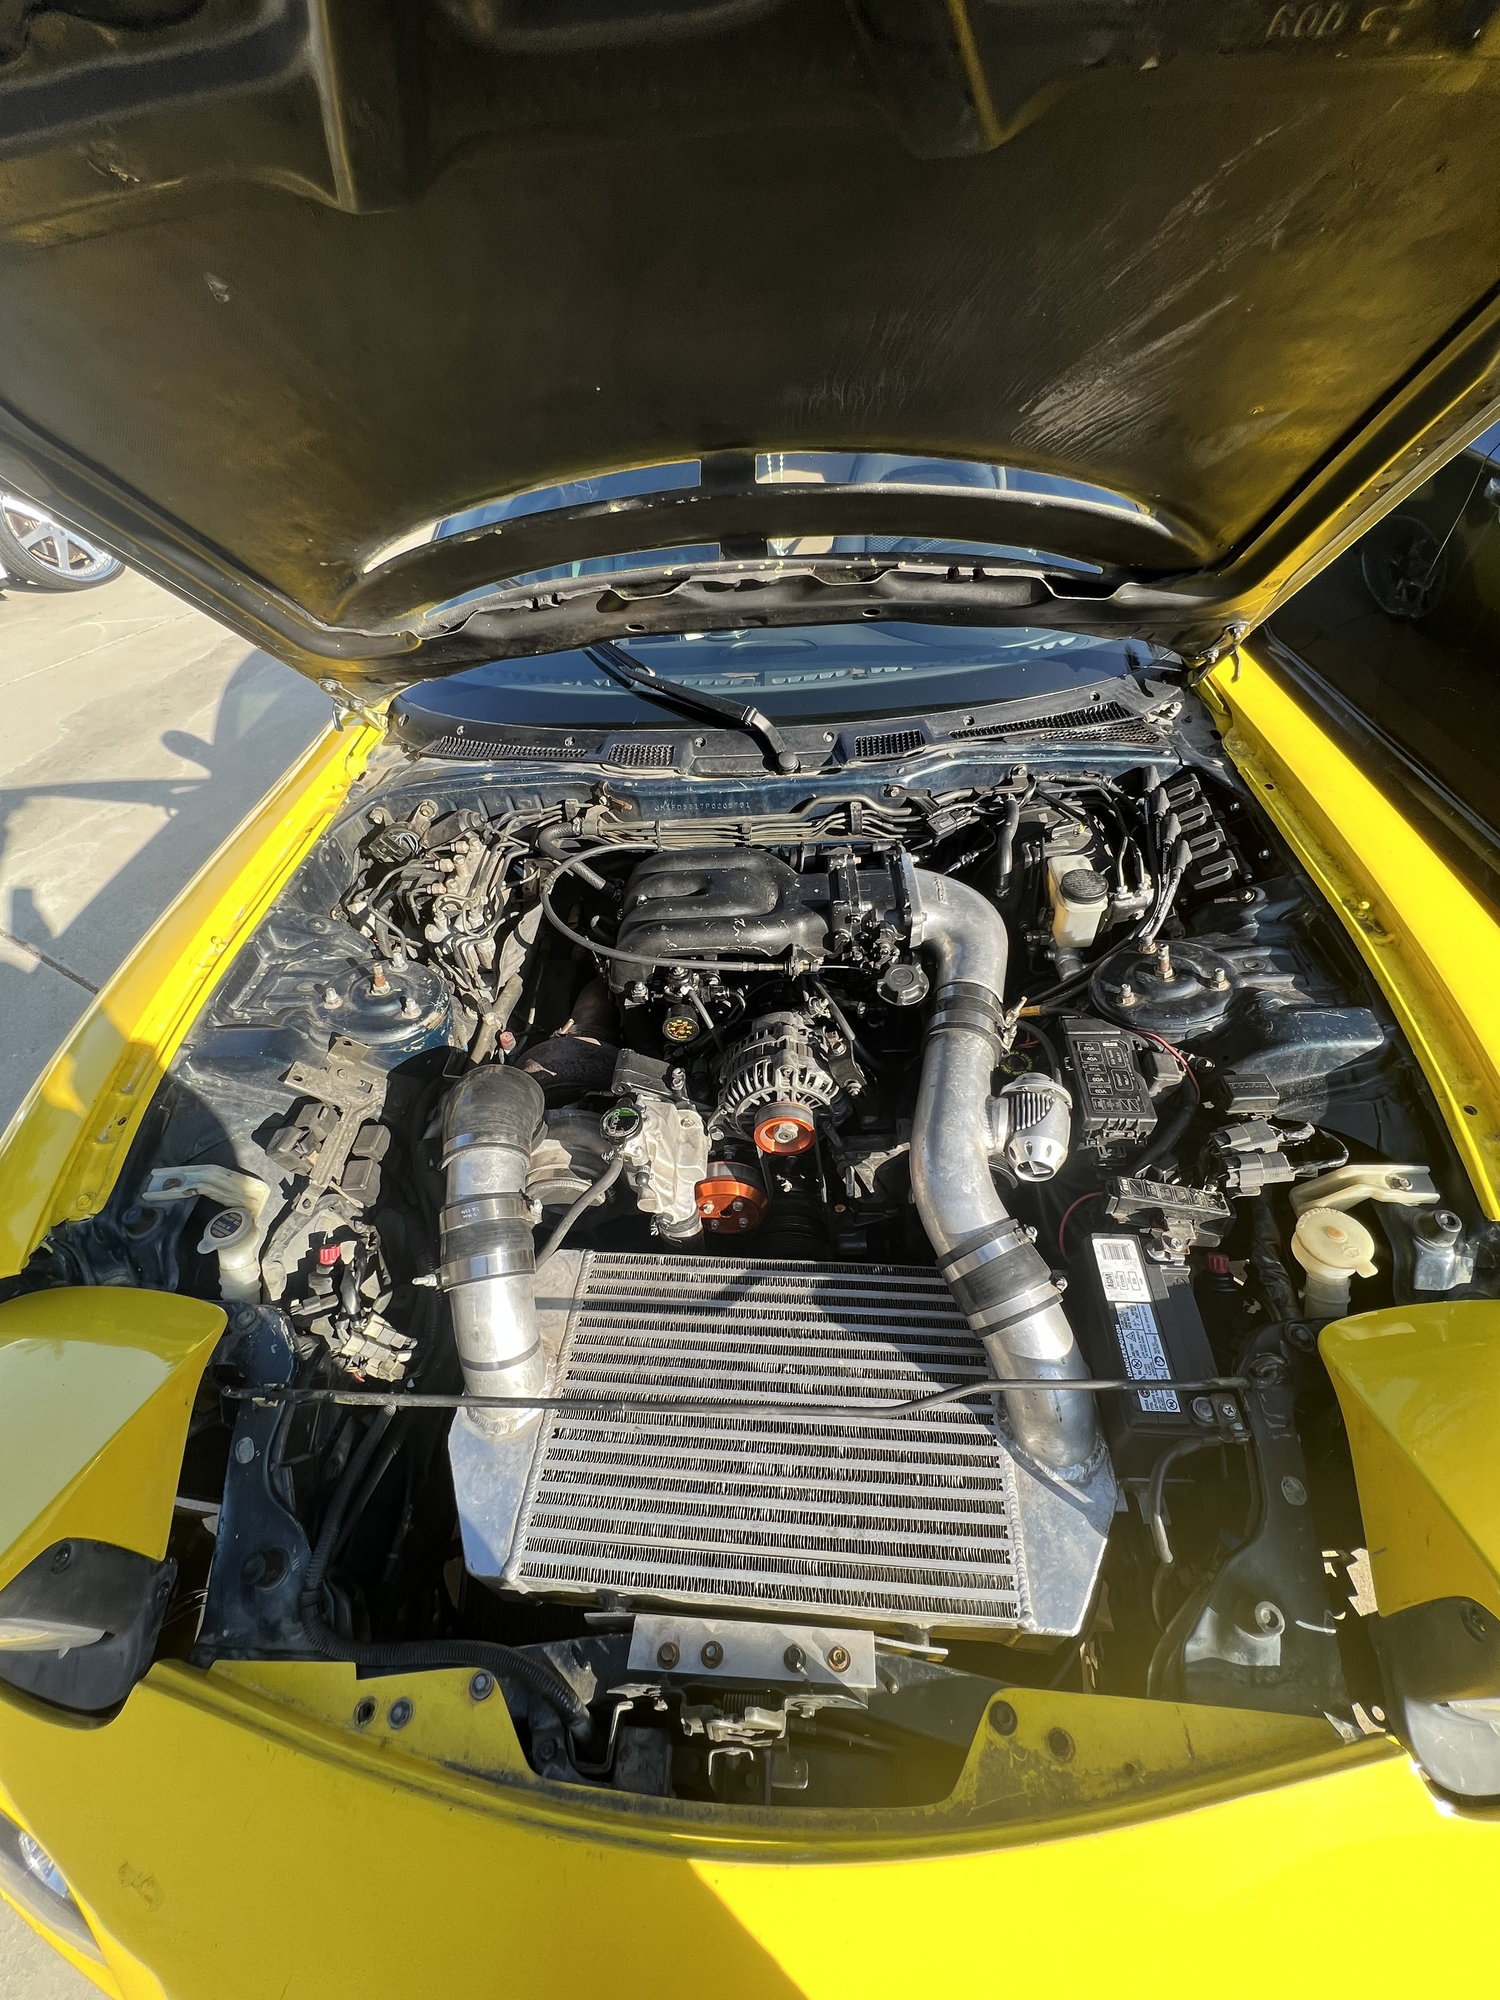 1993 Mazda RX-7 - WTS 1993 Mazda RX-7 - Used - VIN JM1FD3317P0205751 - 130,000 Miles - Other - Manual - Yellow - Escondido, CA 92025, United States